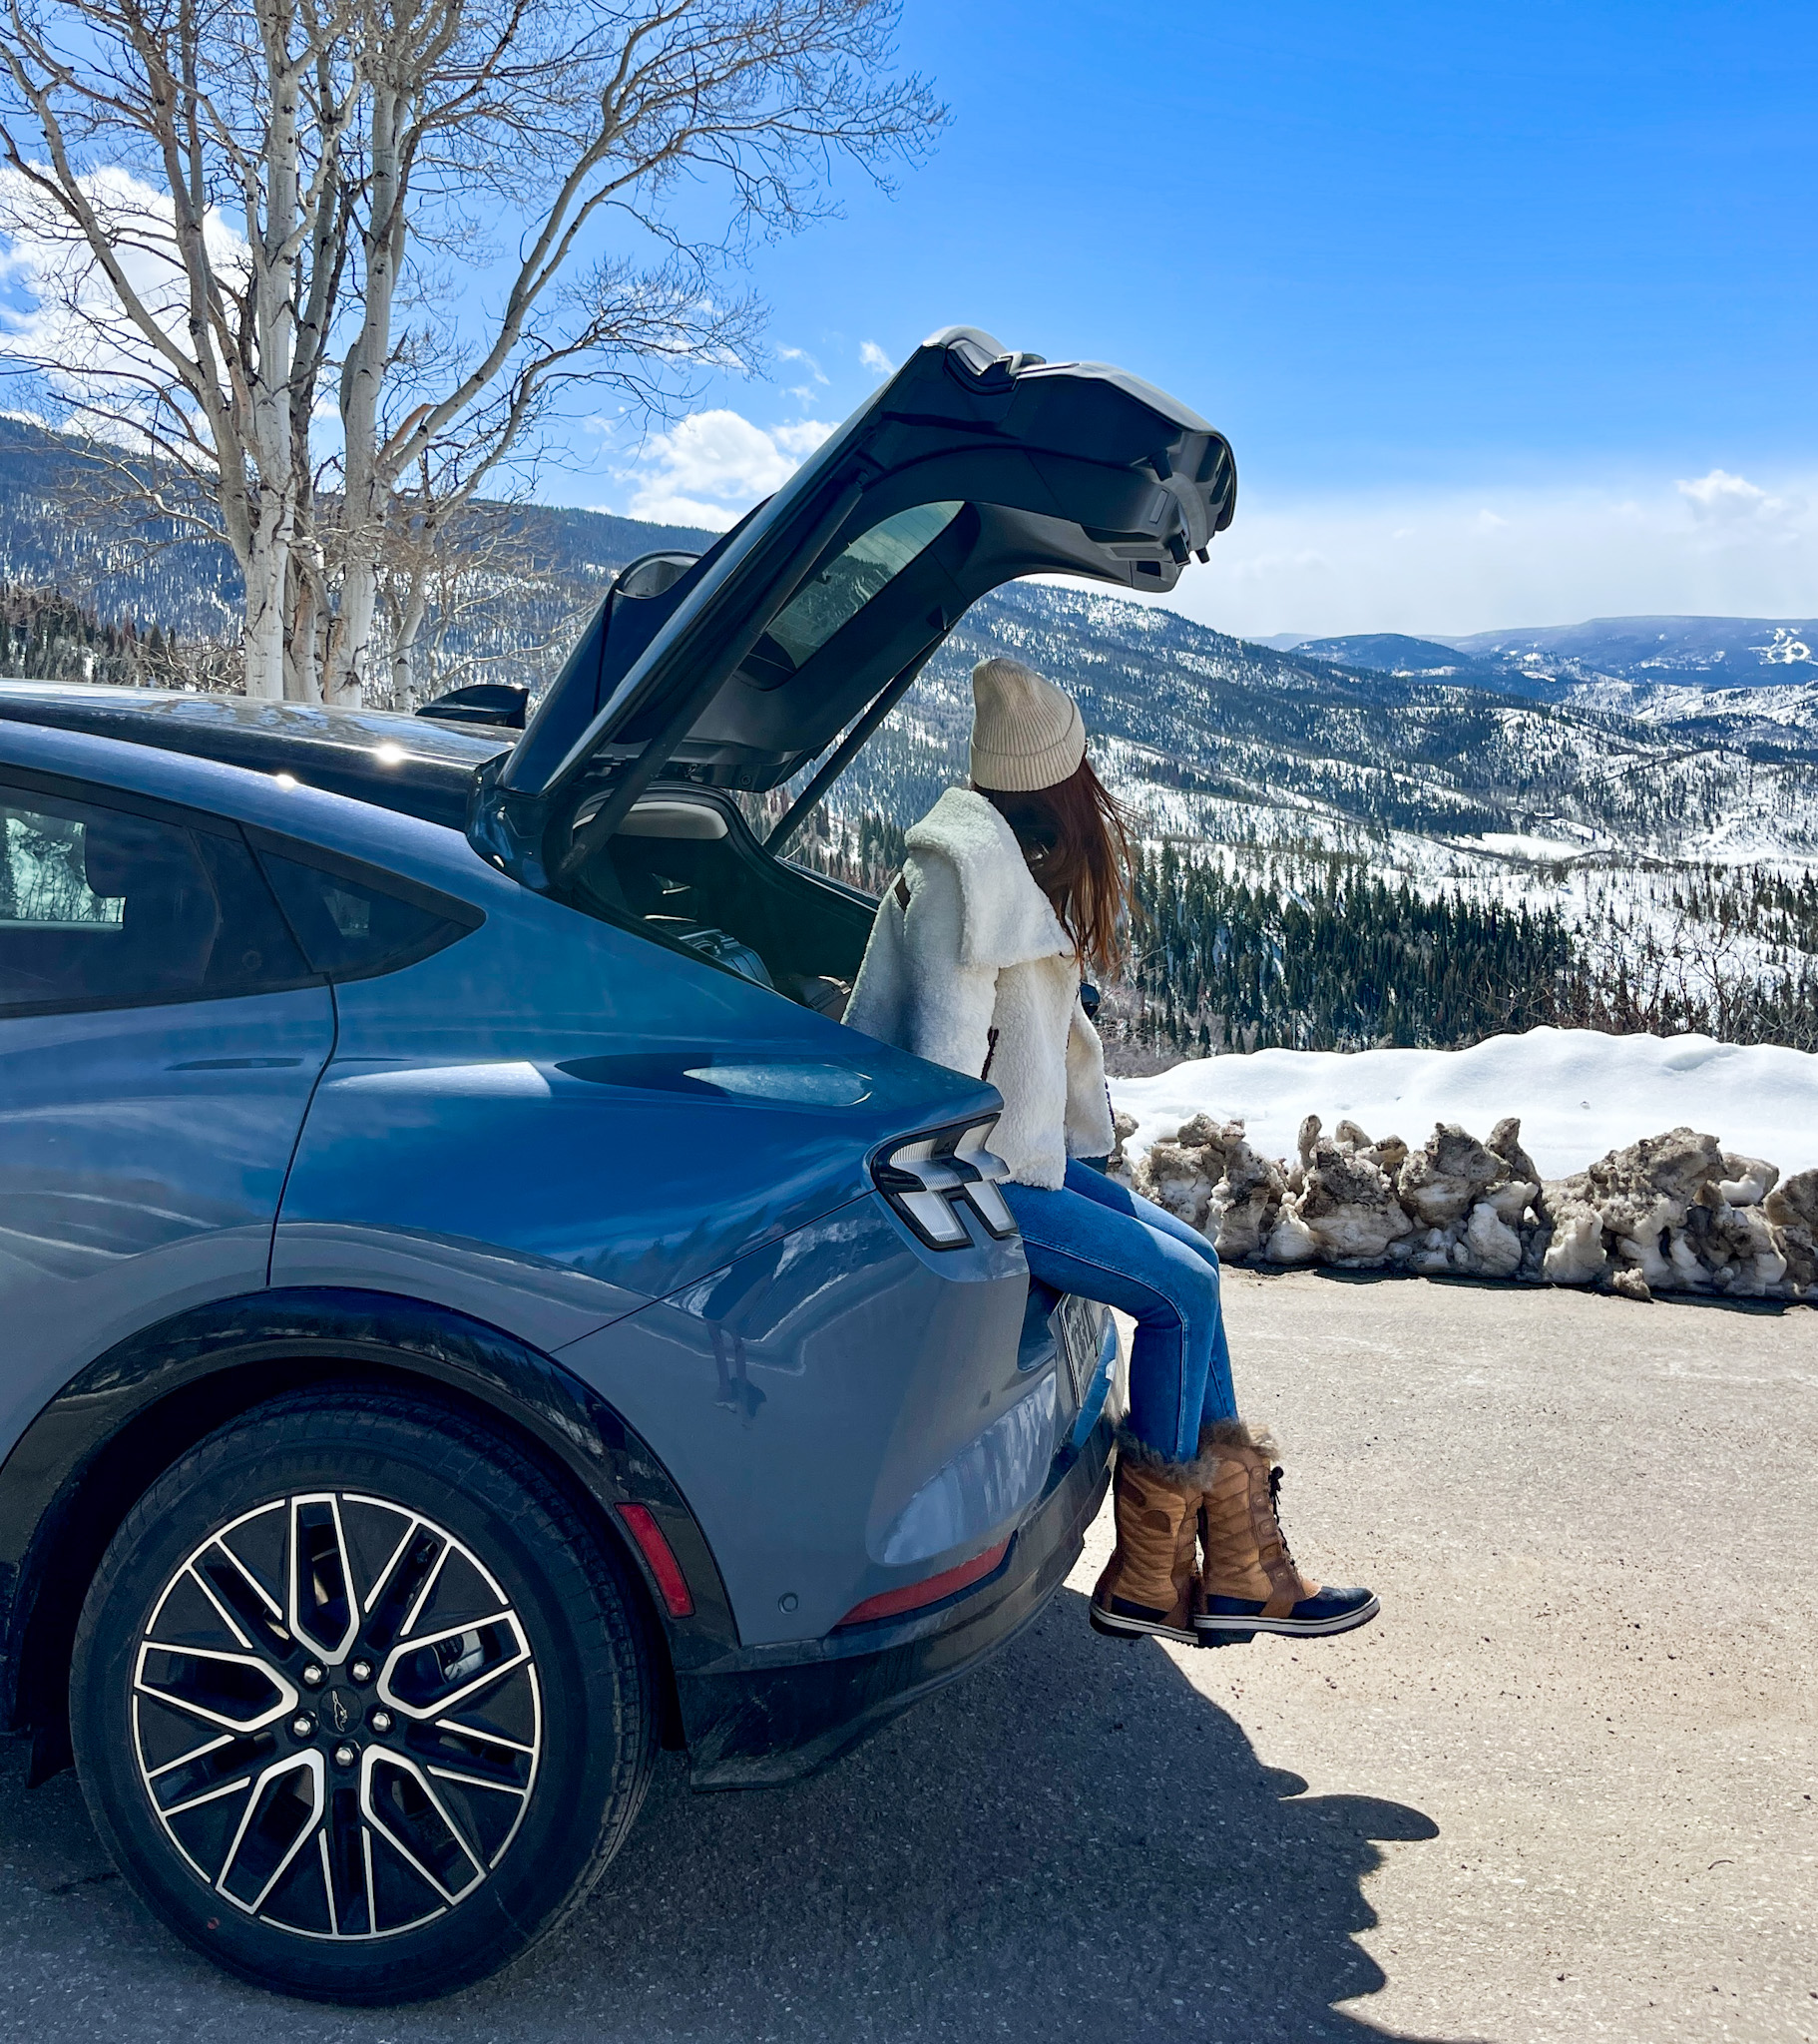 Amanda Bittner sitting in the truck of her gray Ford Mustang Mach-E EV, looking out over the Rockies in winter.